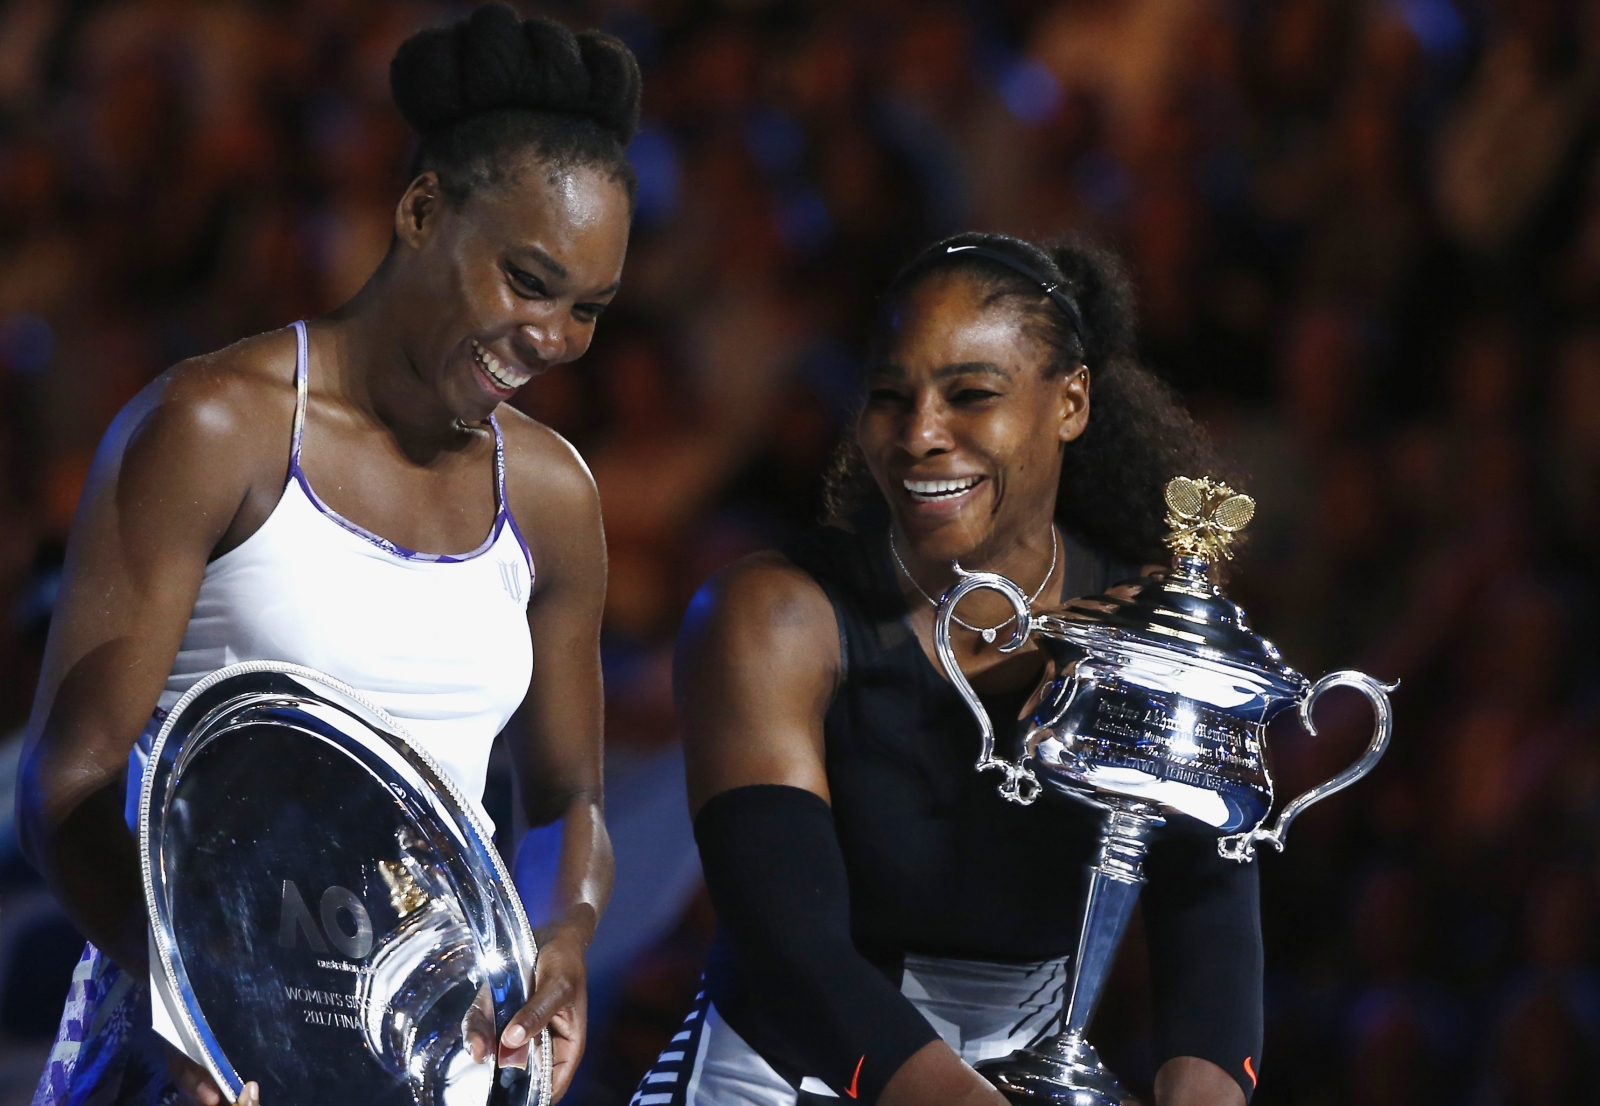 Serena Williams pays tribute to sister Venus WIlliams after beating her